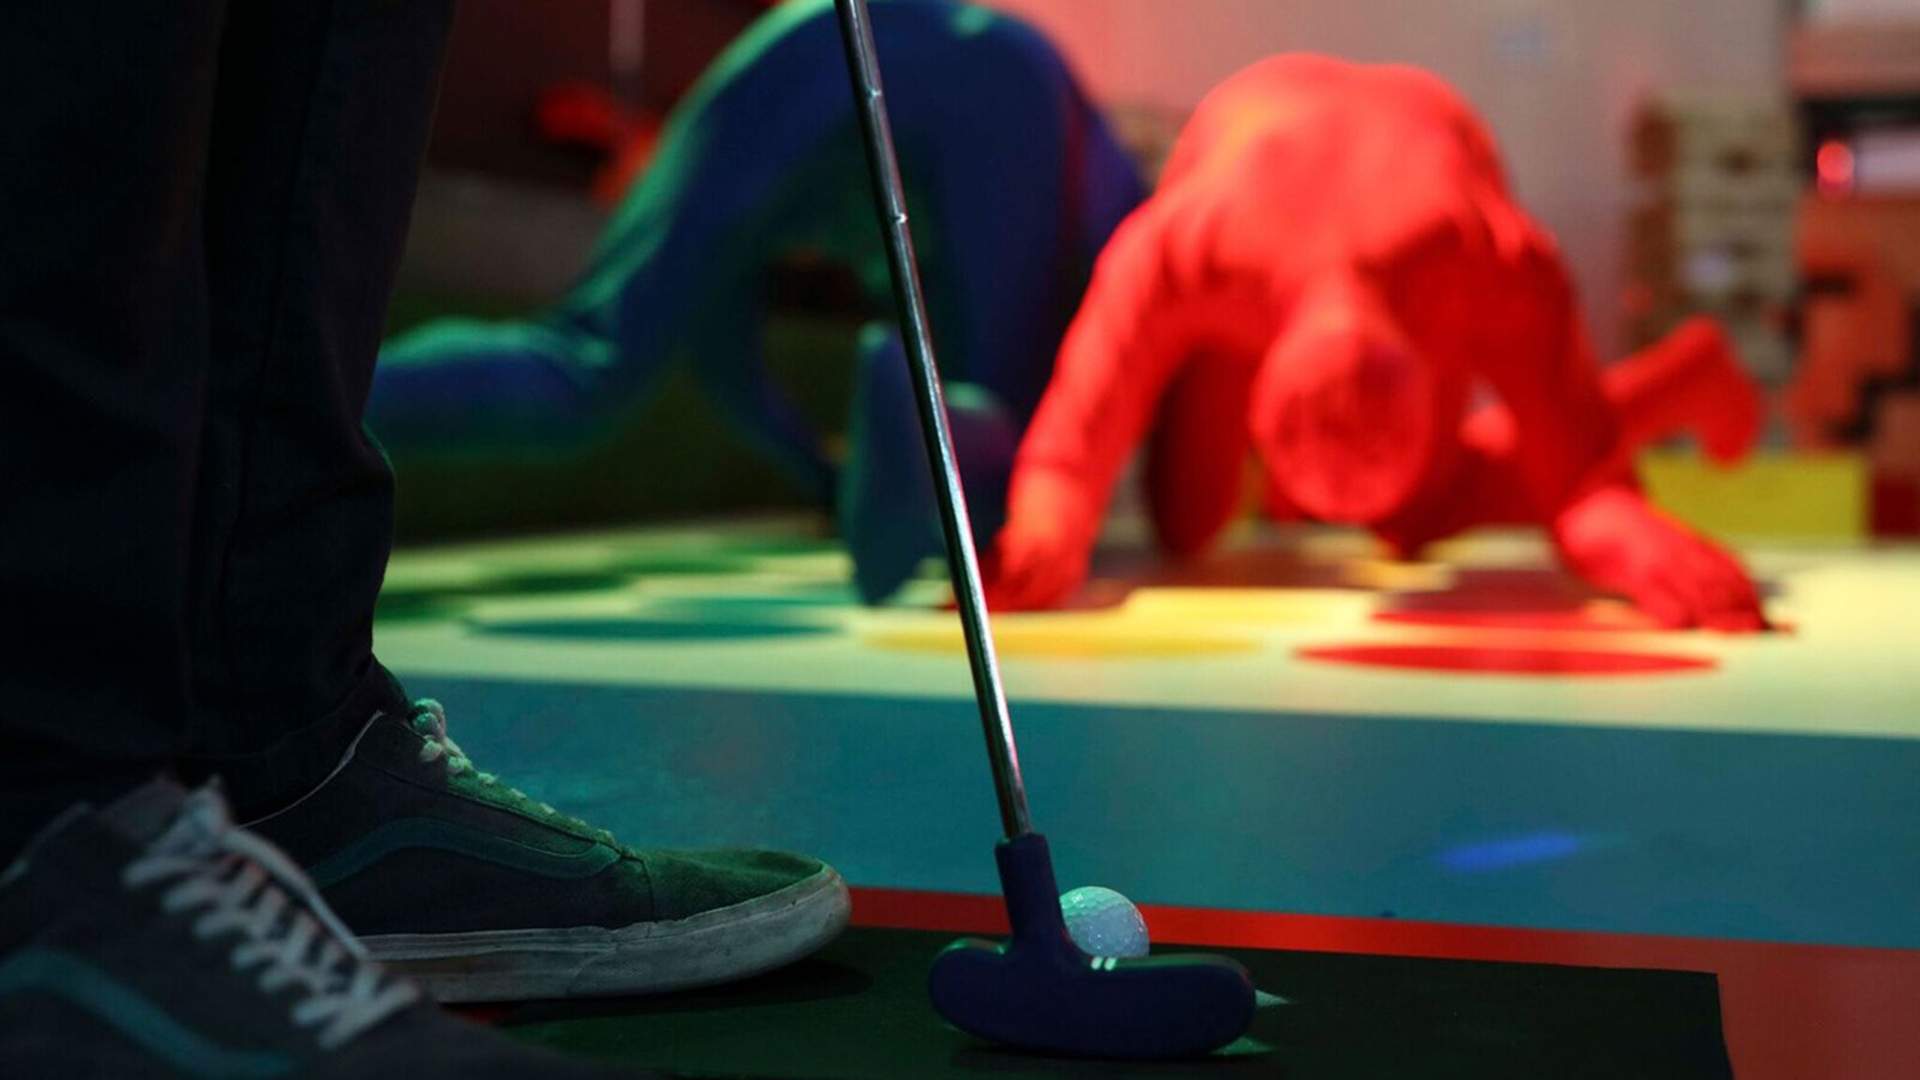 What to Expect from Holey Moley, Sydney's New Two-Storey Mini-Golf Bar